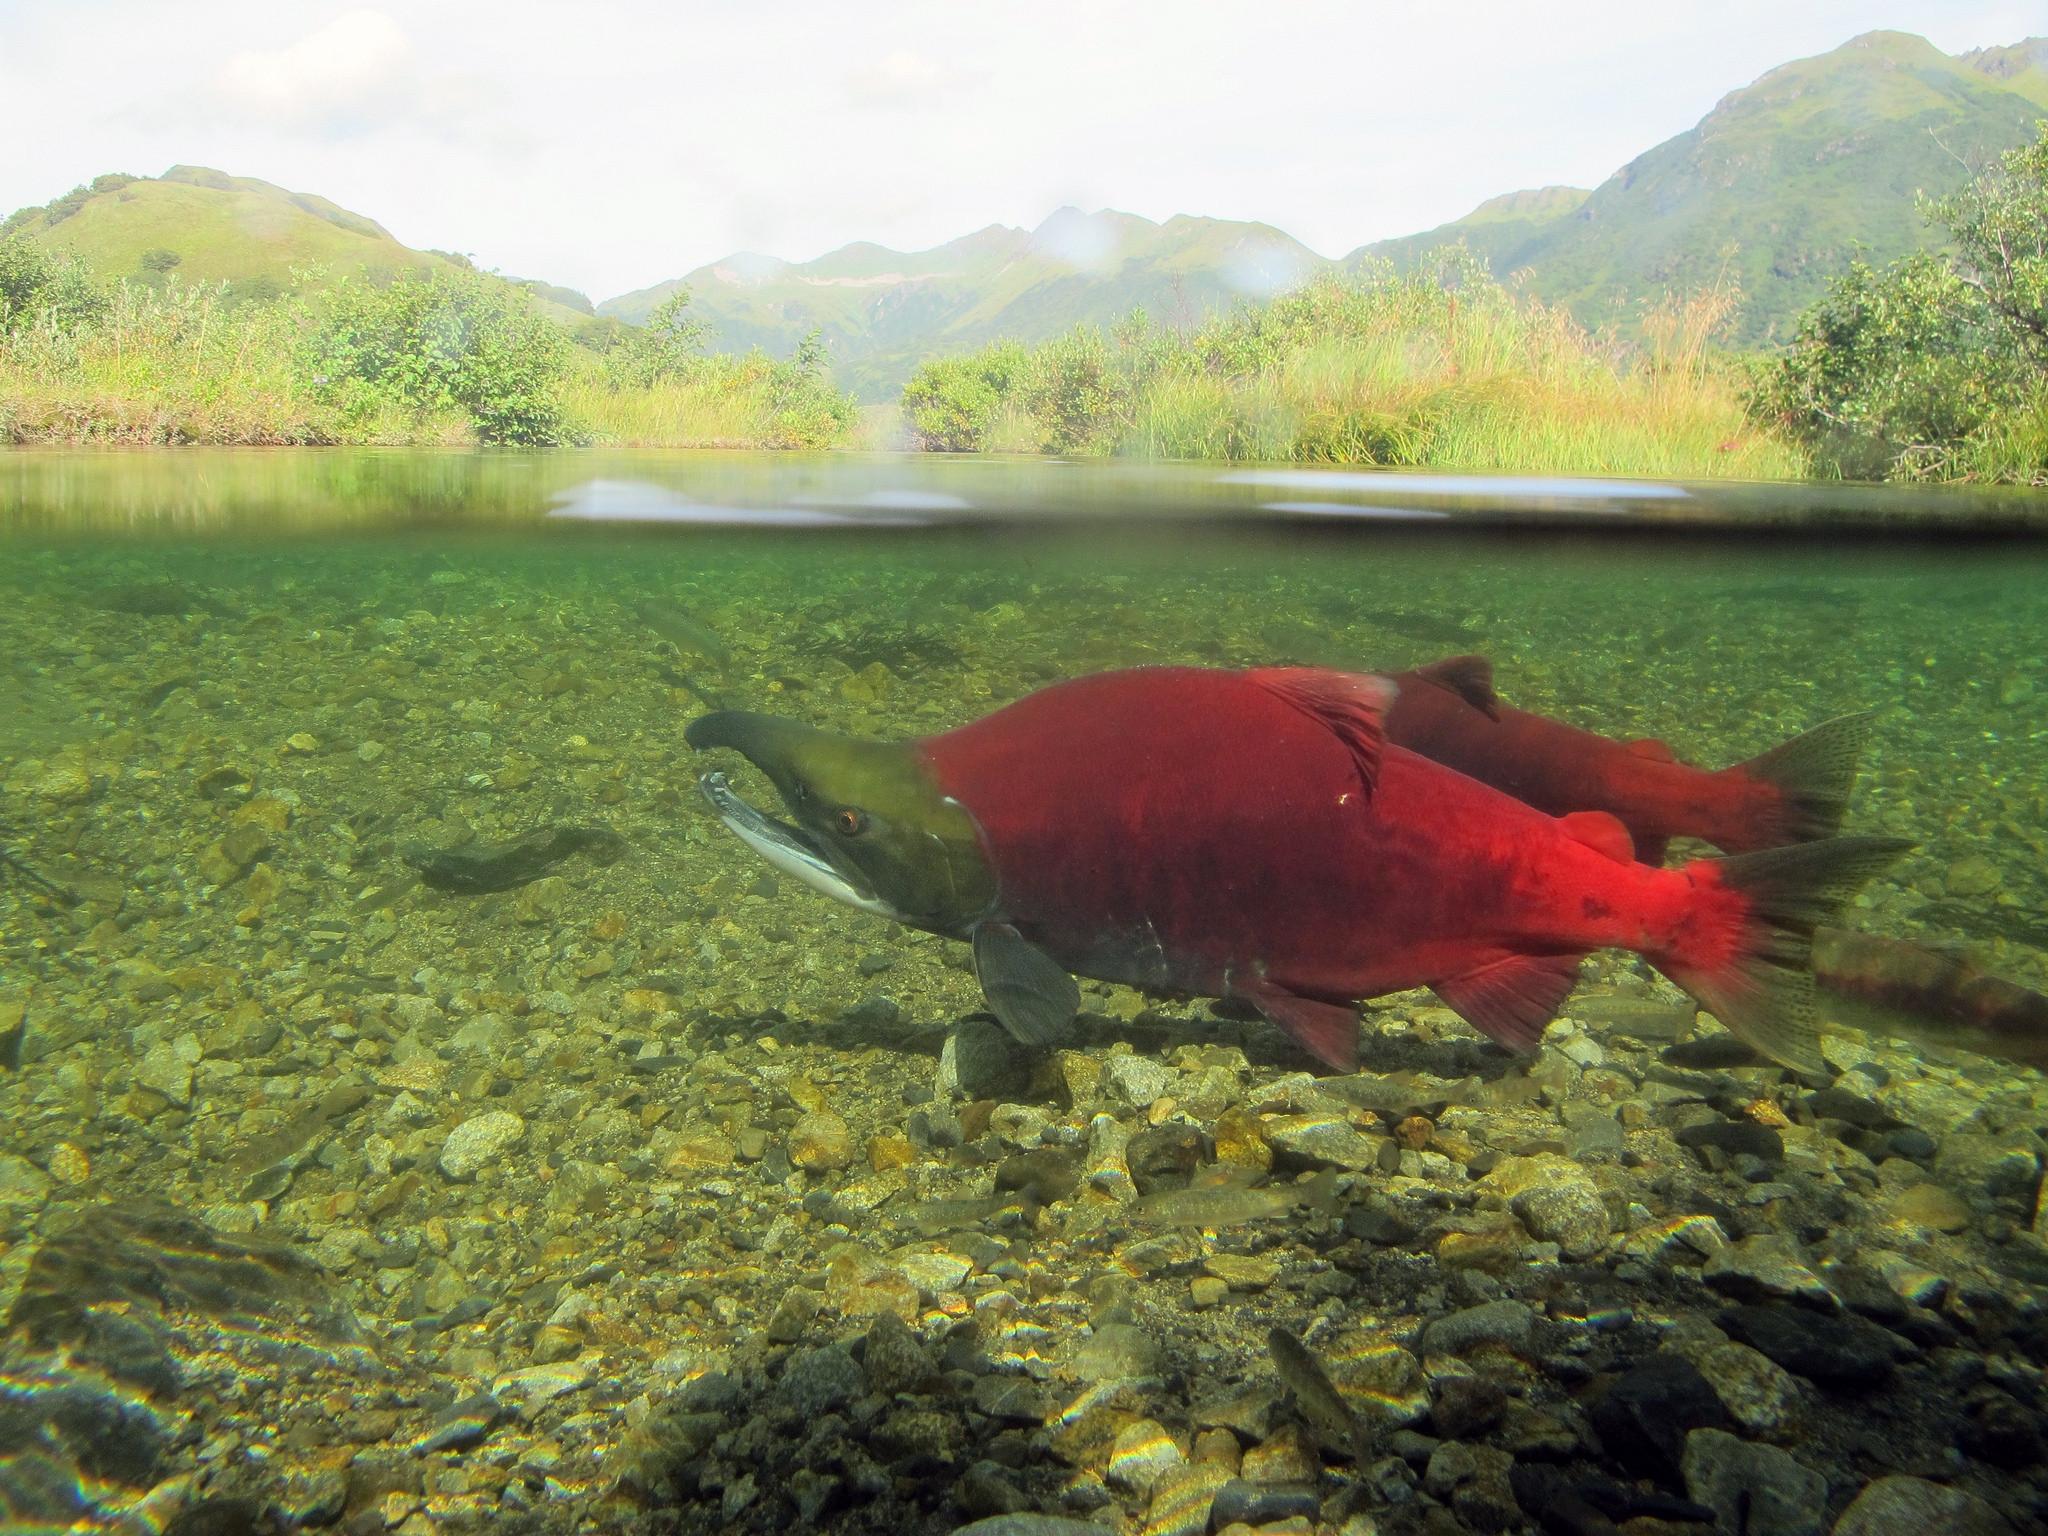 A new report says salmon, including sockeye, shown here, could have habitat disrupted by new rainfall and snow patterns caused by climate change. (Photo by Katrina Mueller/U.S. Fish and Wildlife Service)